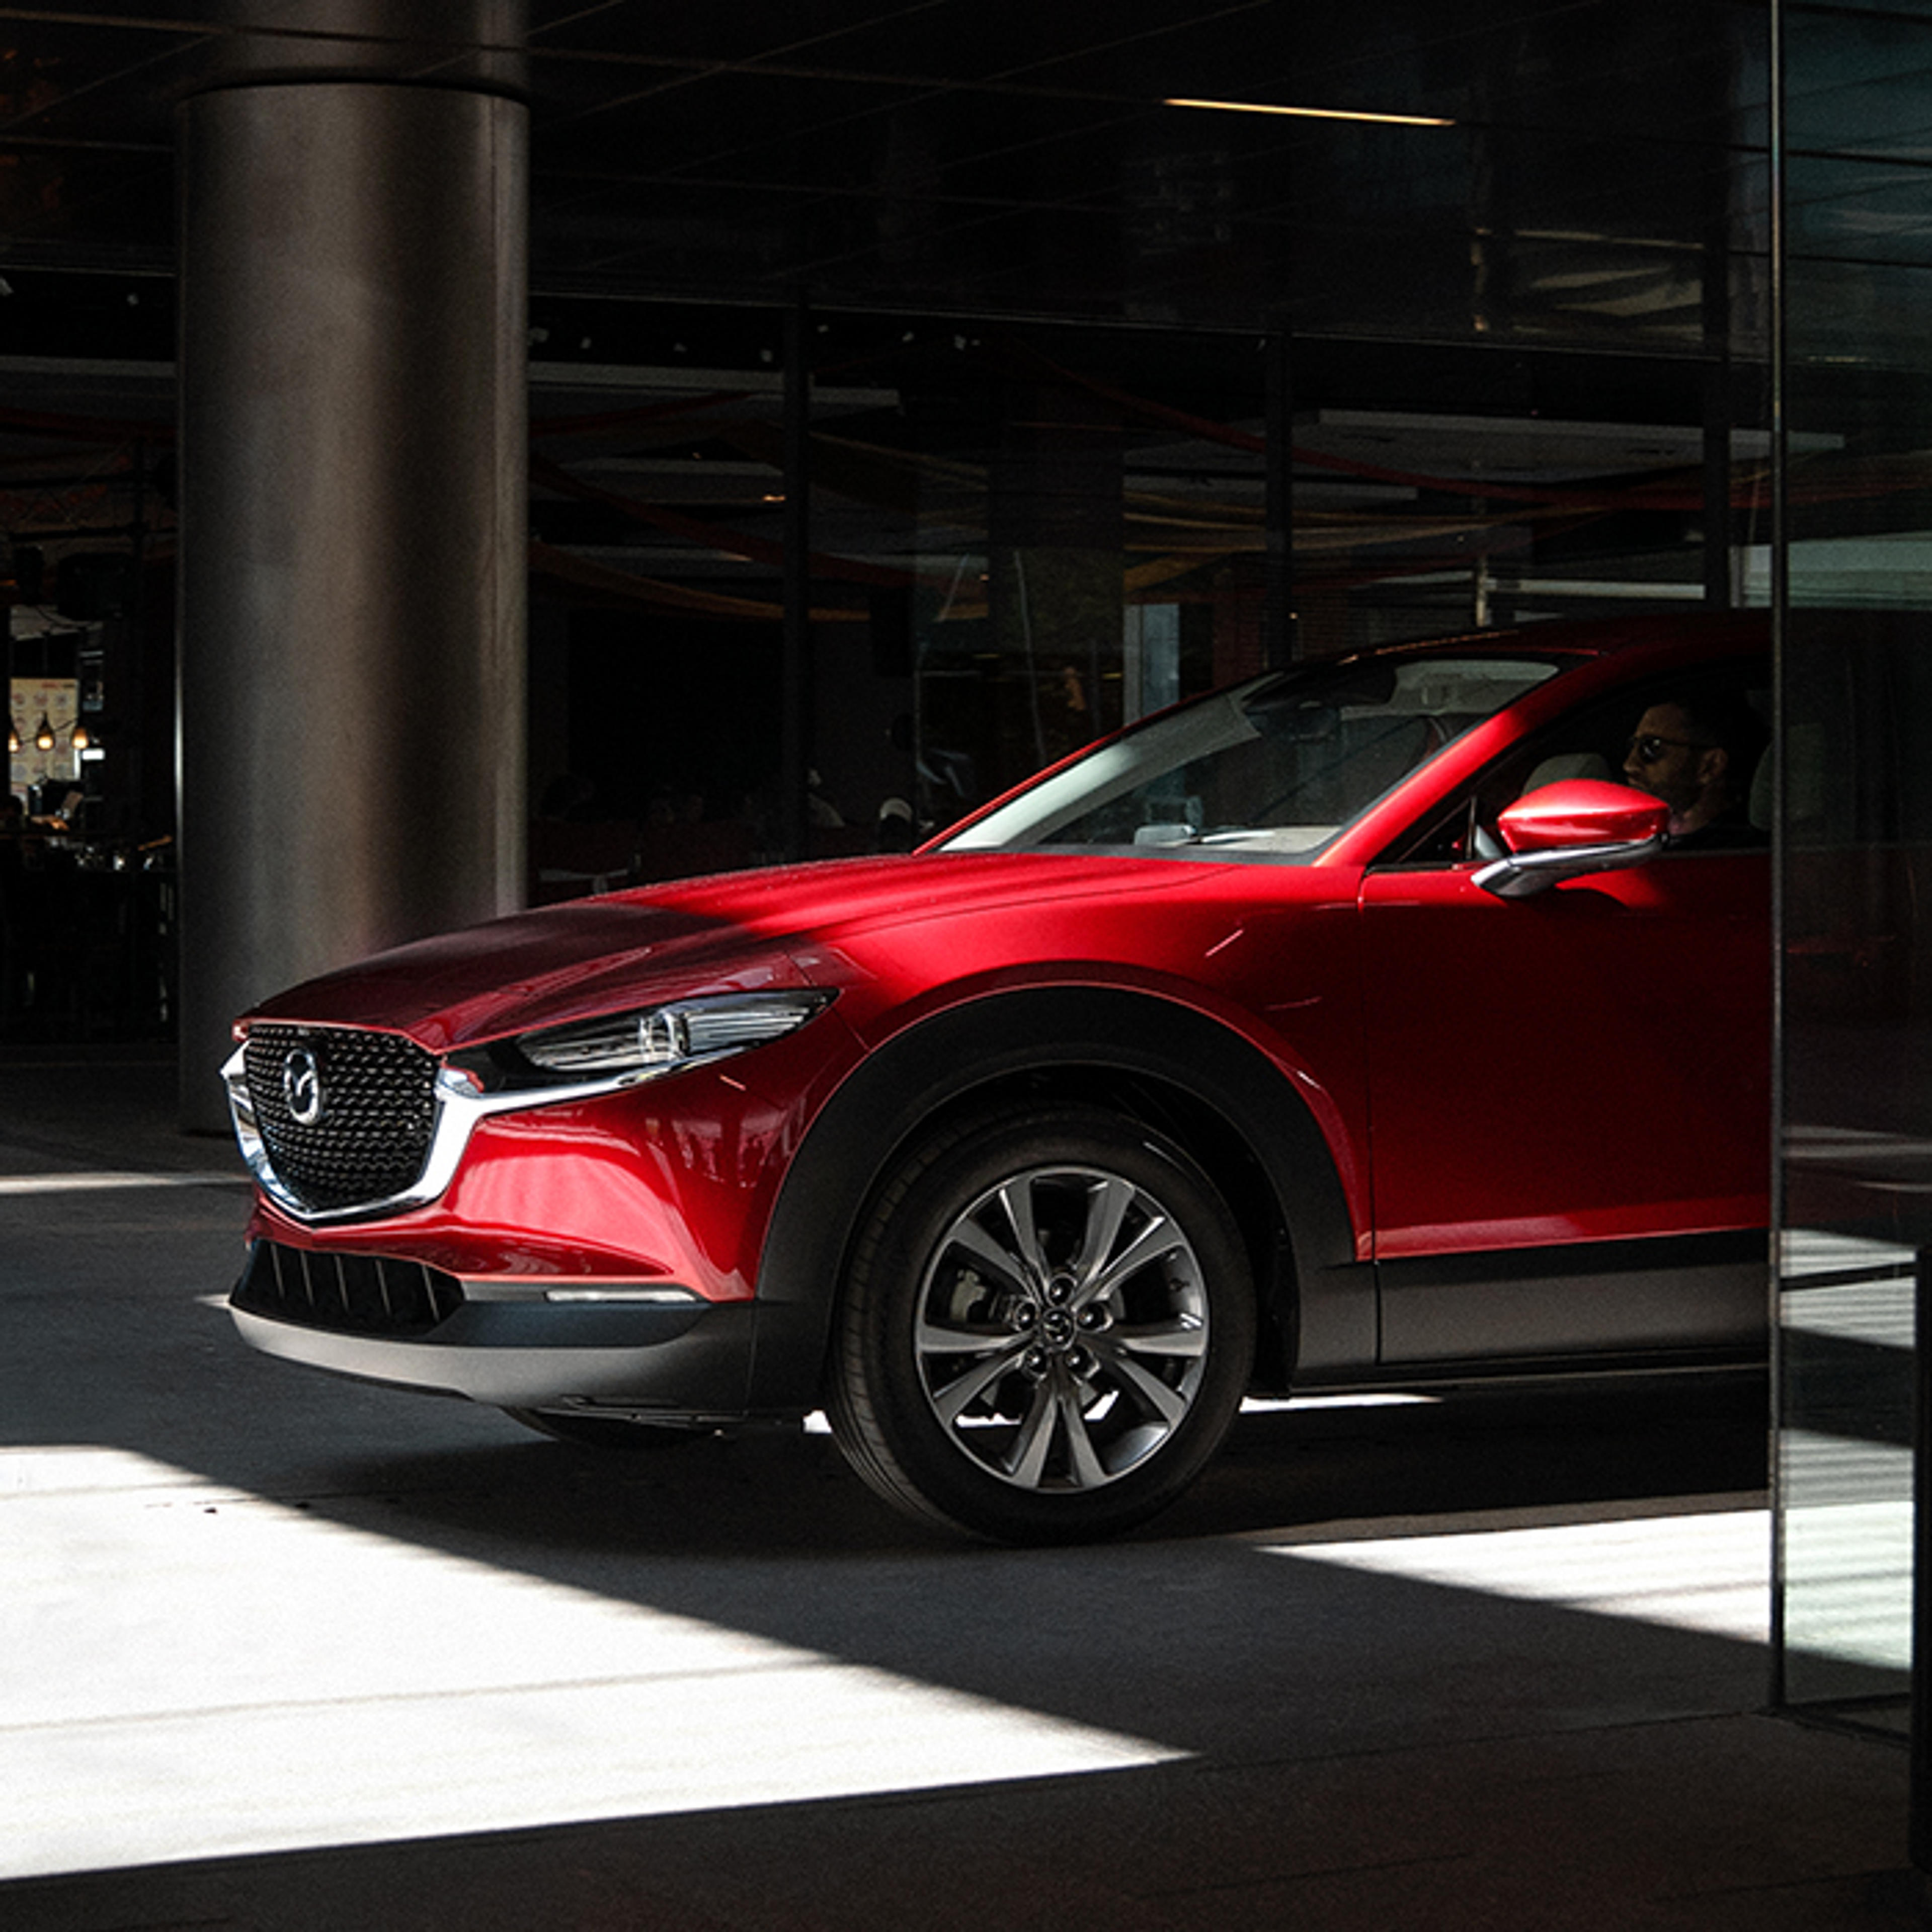 Current Mazda Incentives & Special Offers